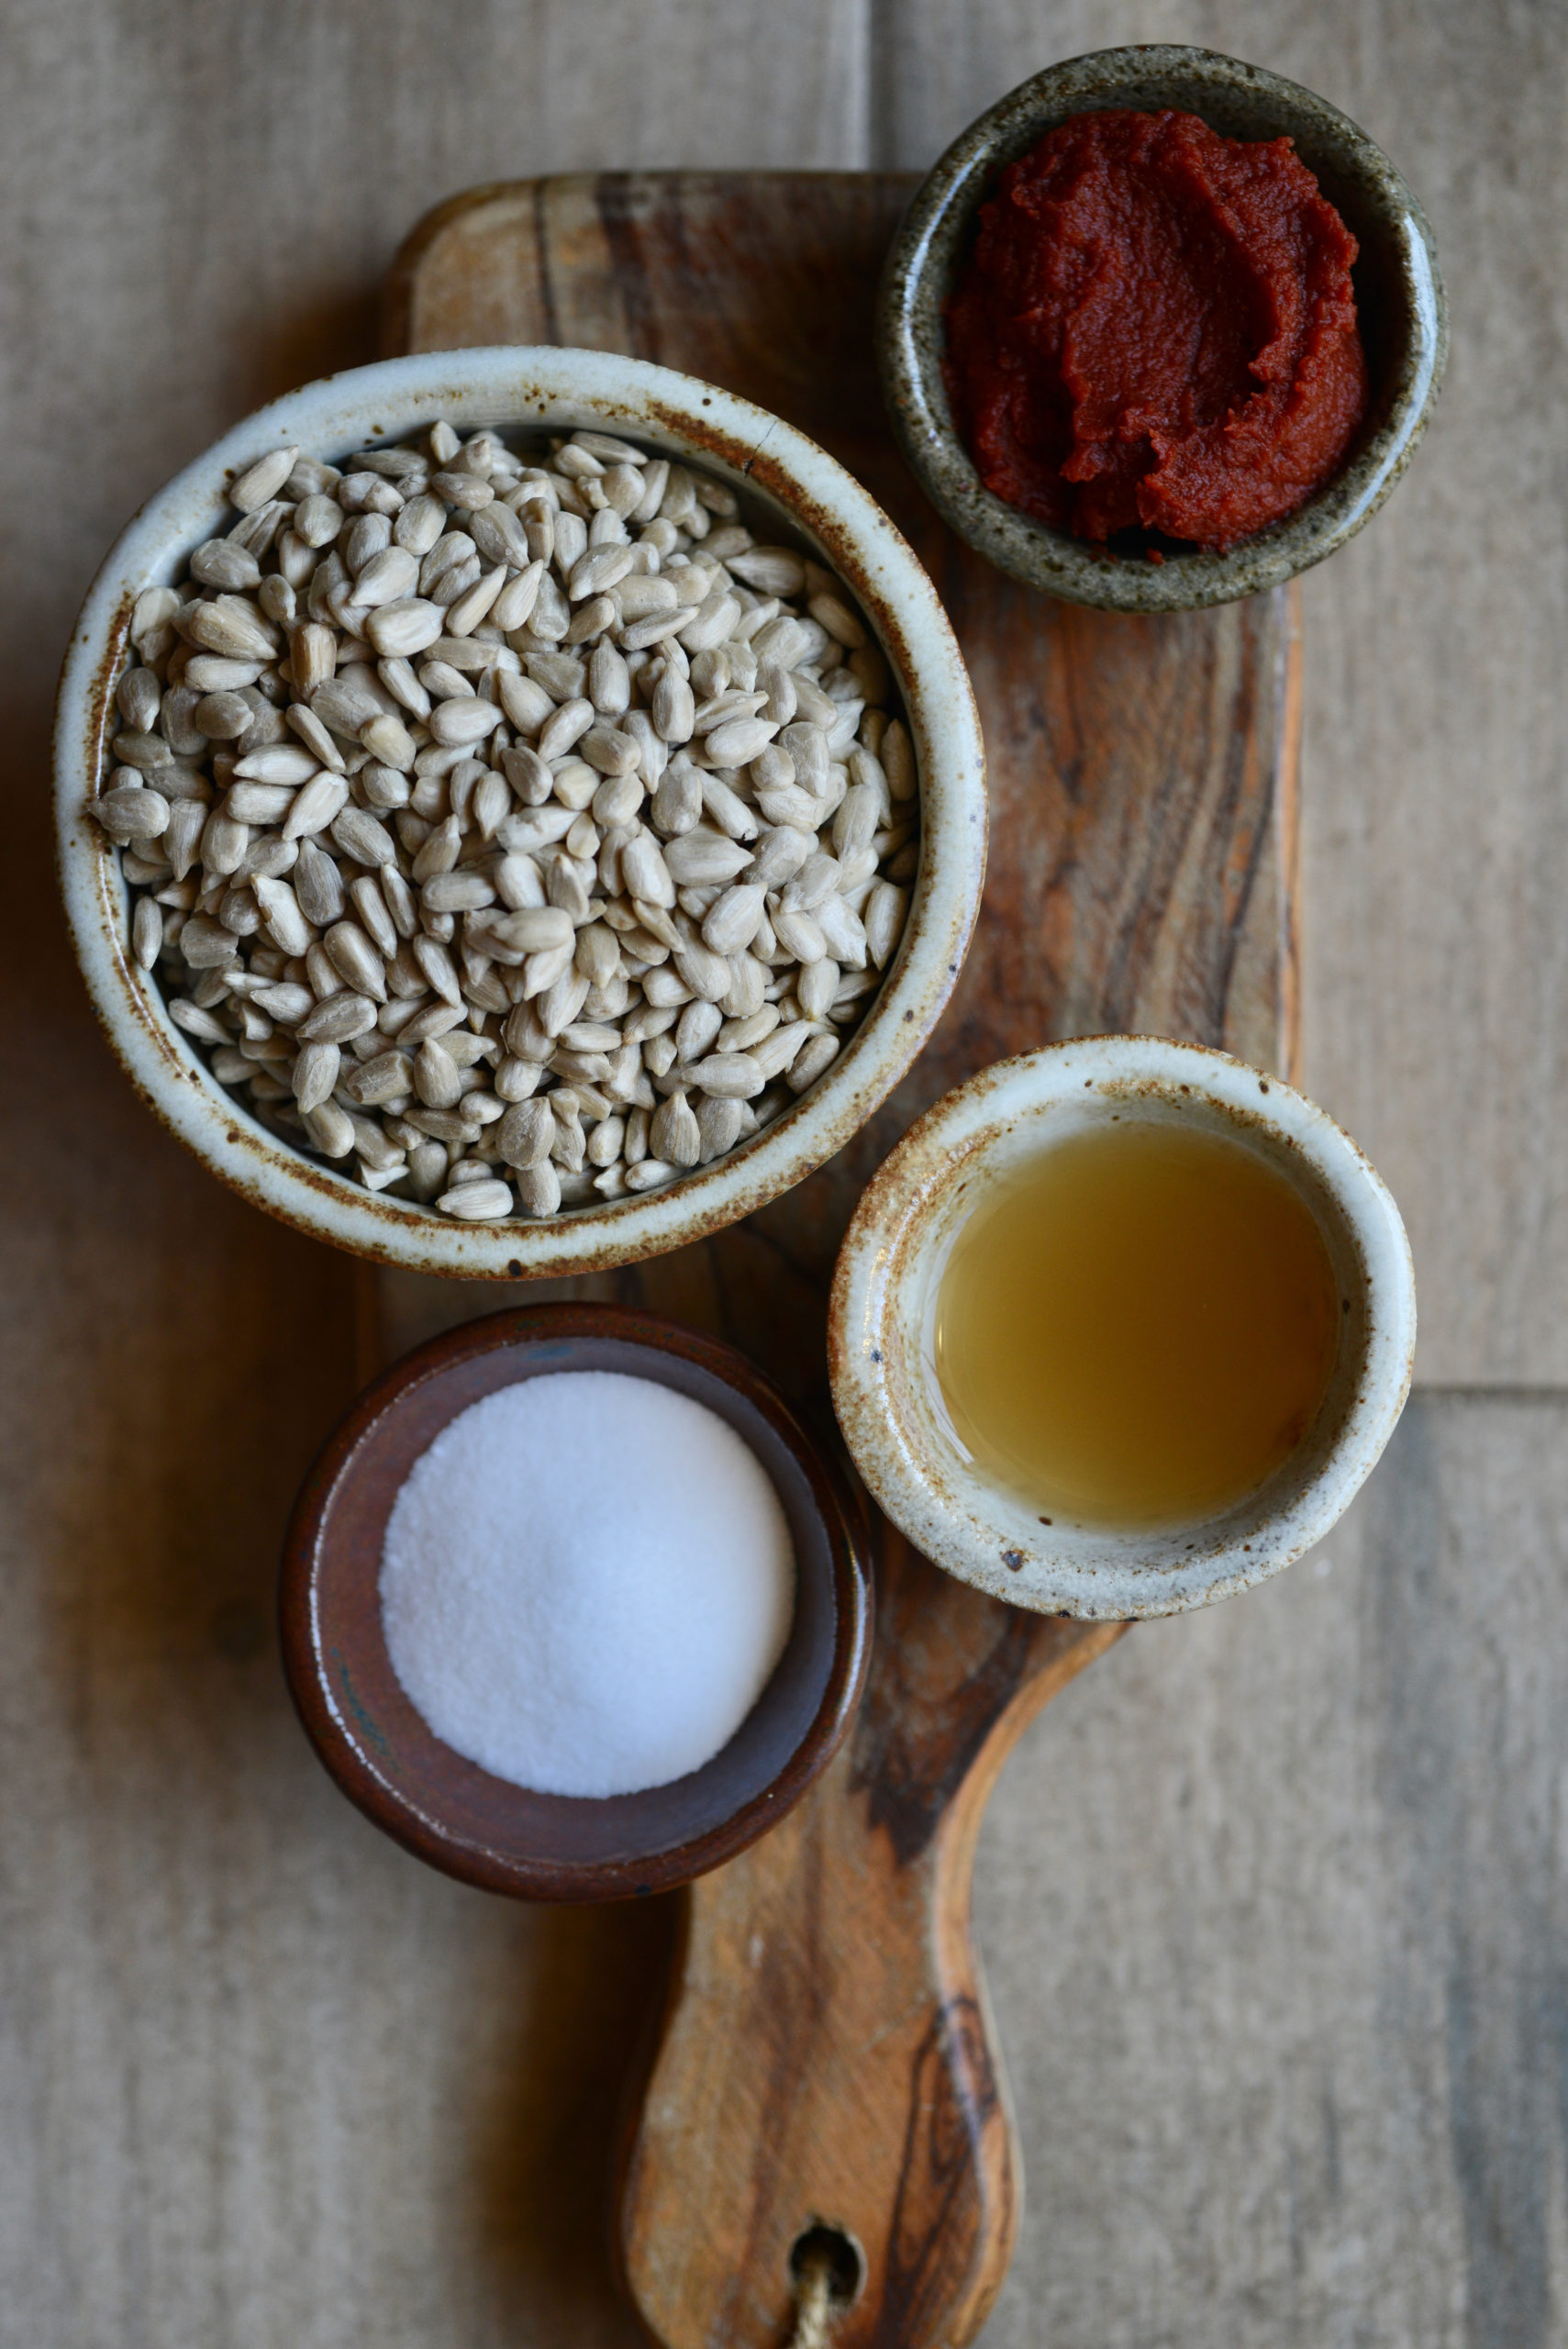 Ingredients for Creamy Plant-Based Mac 'n' Cheese on small wooden board - sunflower seeds, tomato paste, apple cider vinegar, and salt